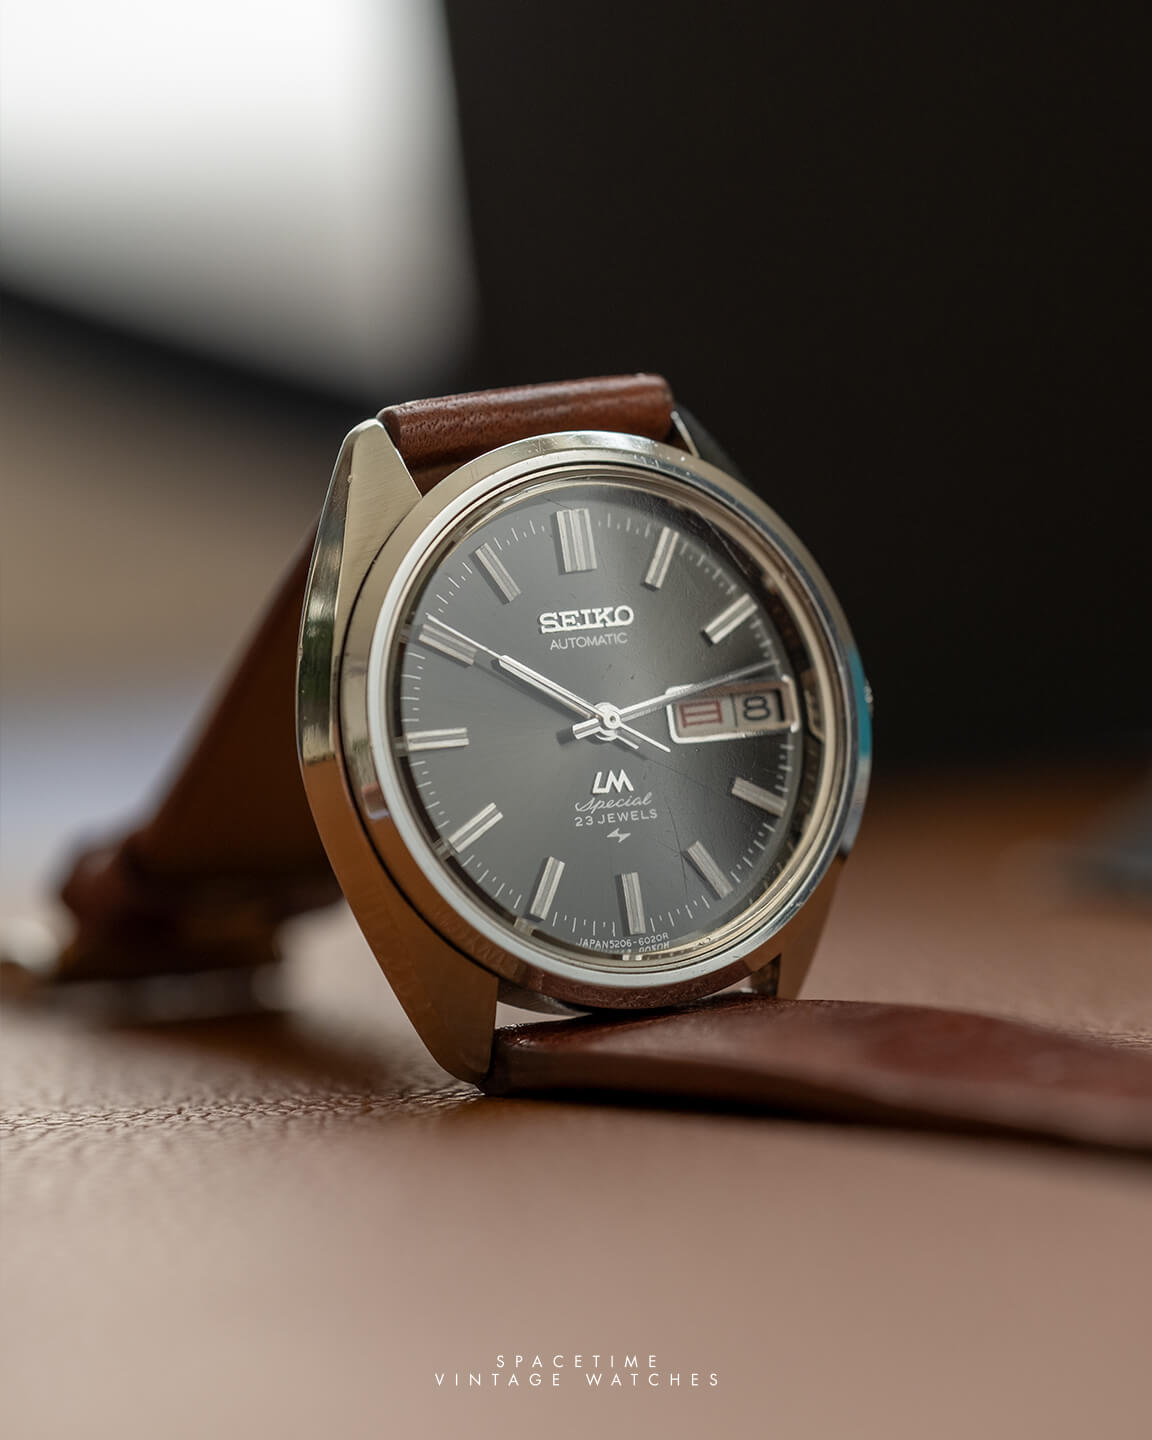 SEIKO LM SPECIAL ref 5206 – Spacetime